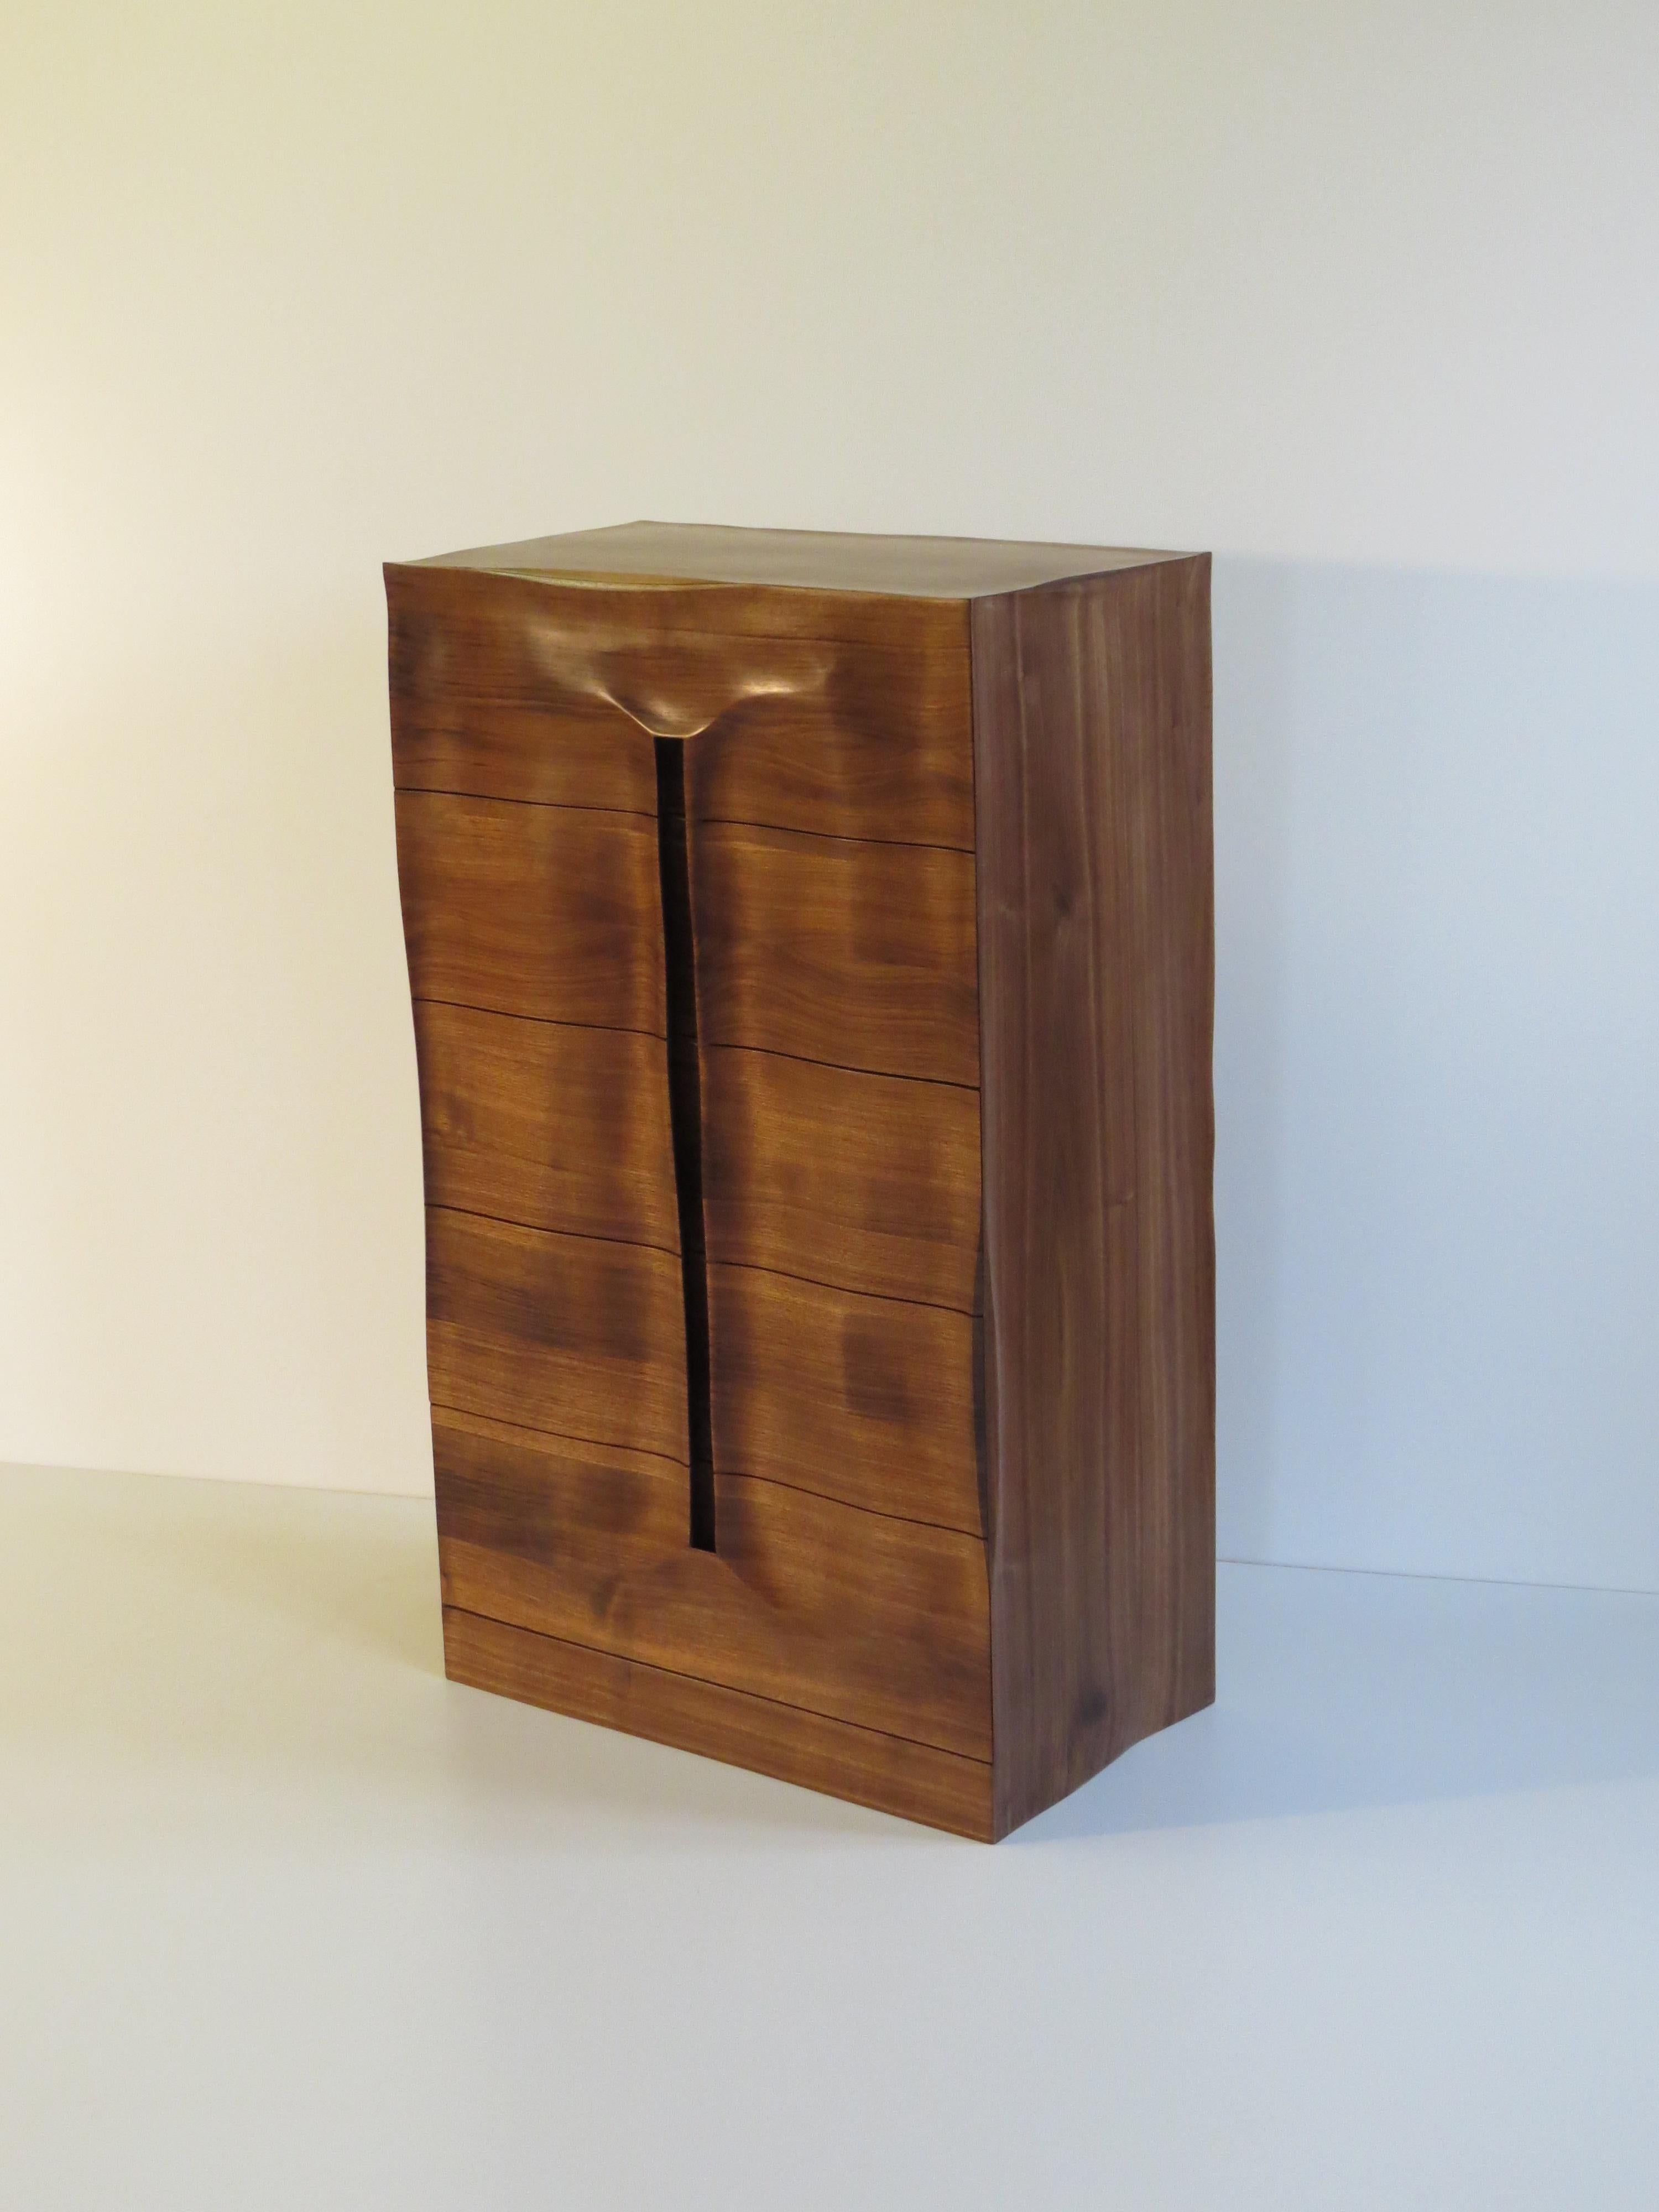 Hand-Crafted Dresser, Solid Walnut, Handmade in Organic Design, Germany, Also as a Sideboard For Sale